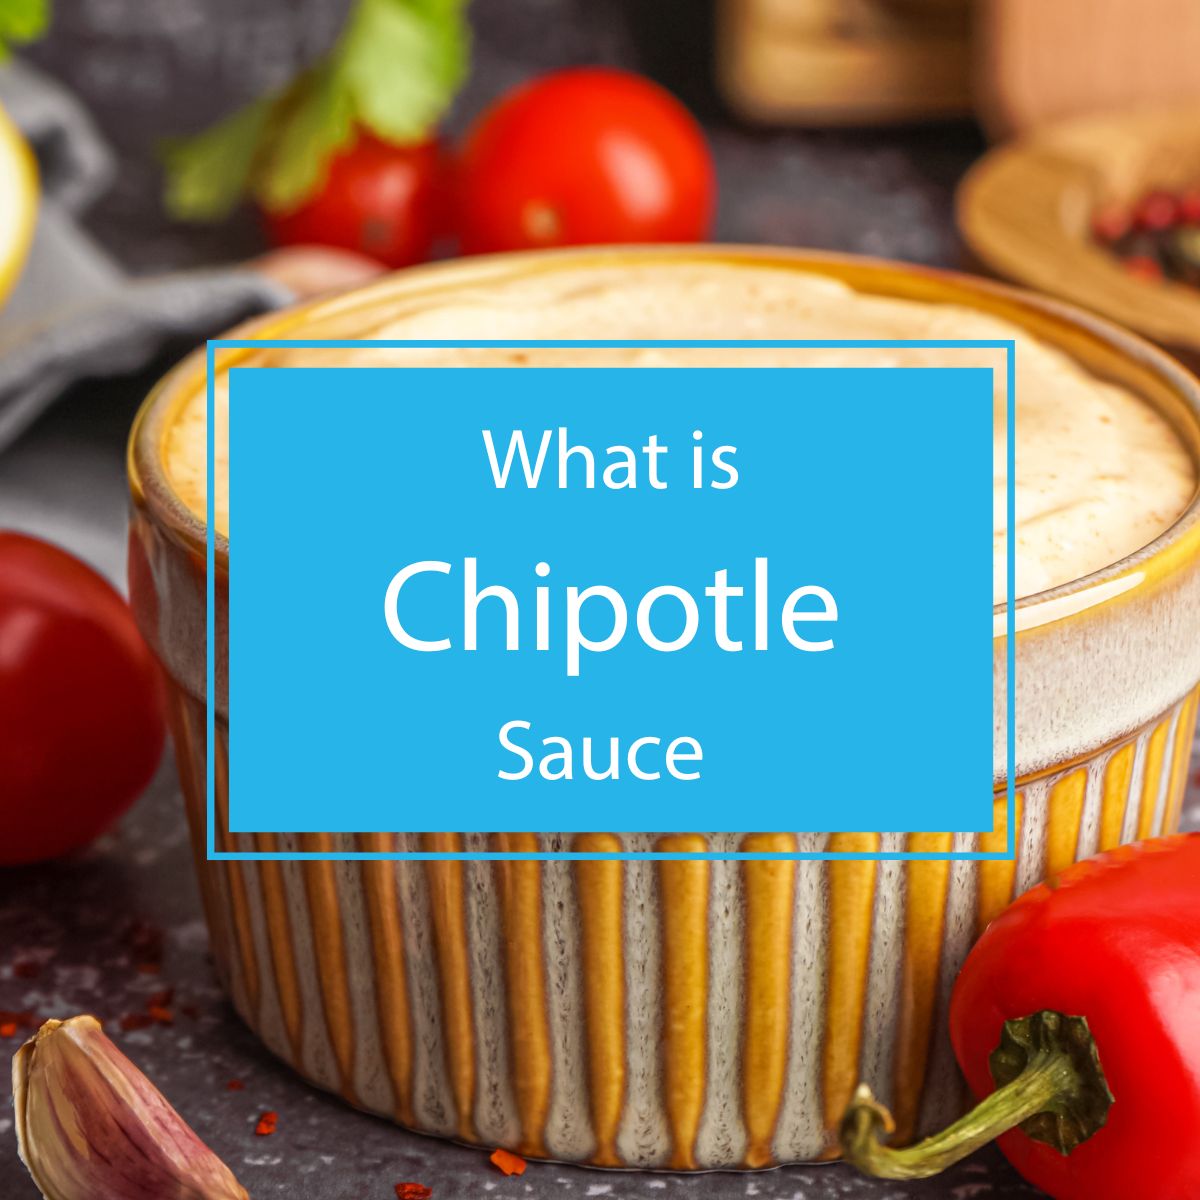 What is Chipotle Sauce